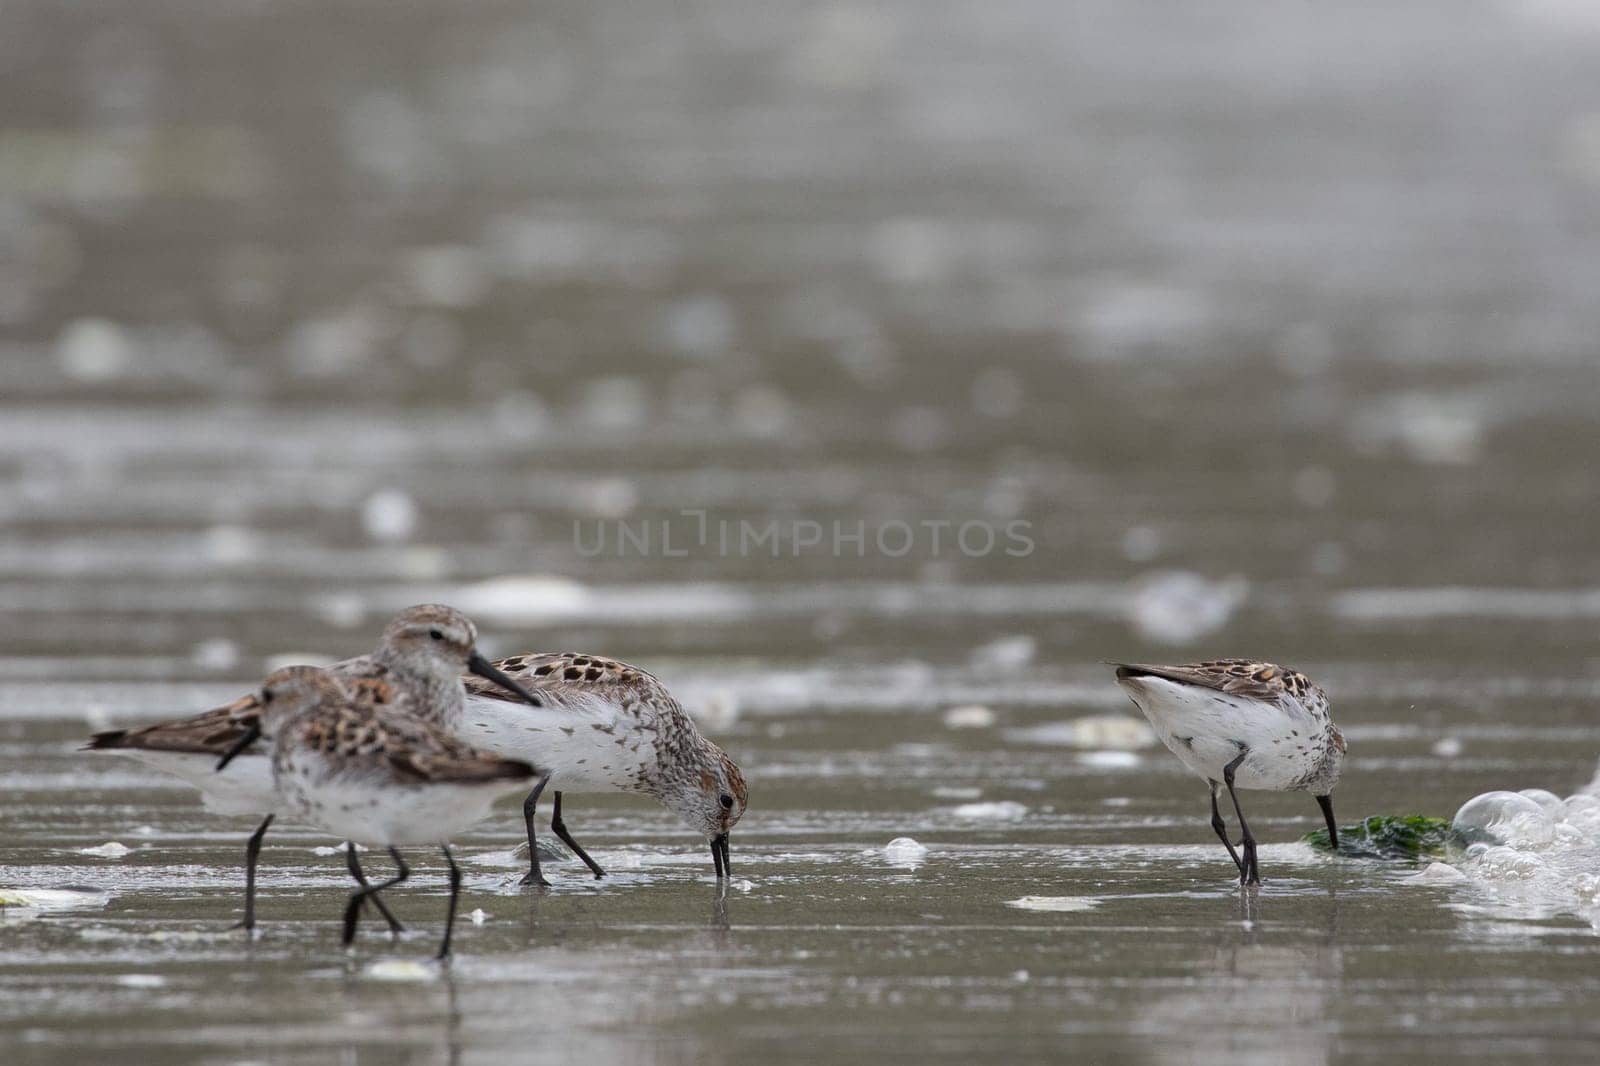 Western sandpipers wading along a deserted shoreline searching for food by Granchinho